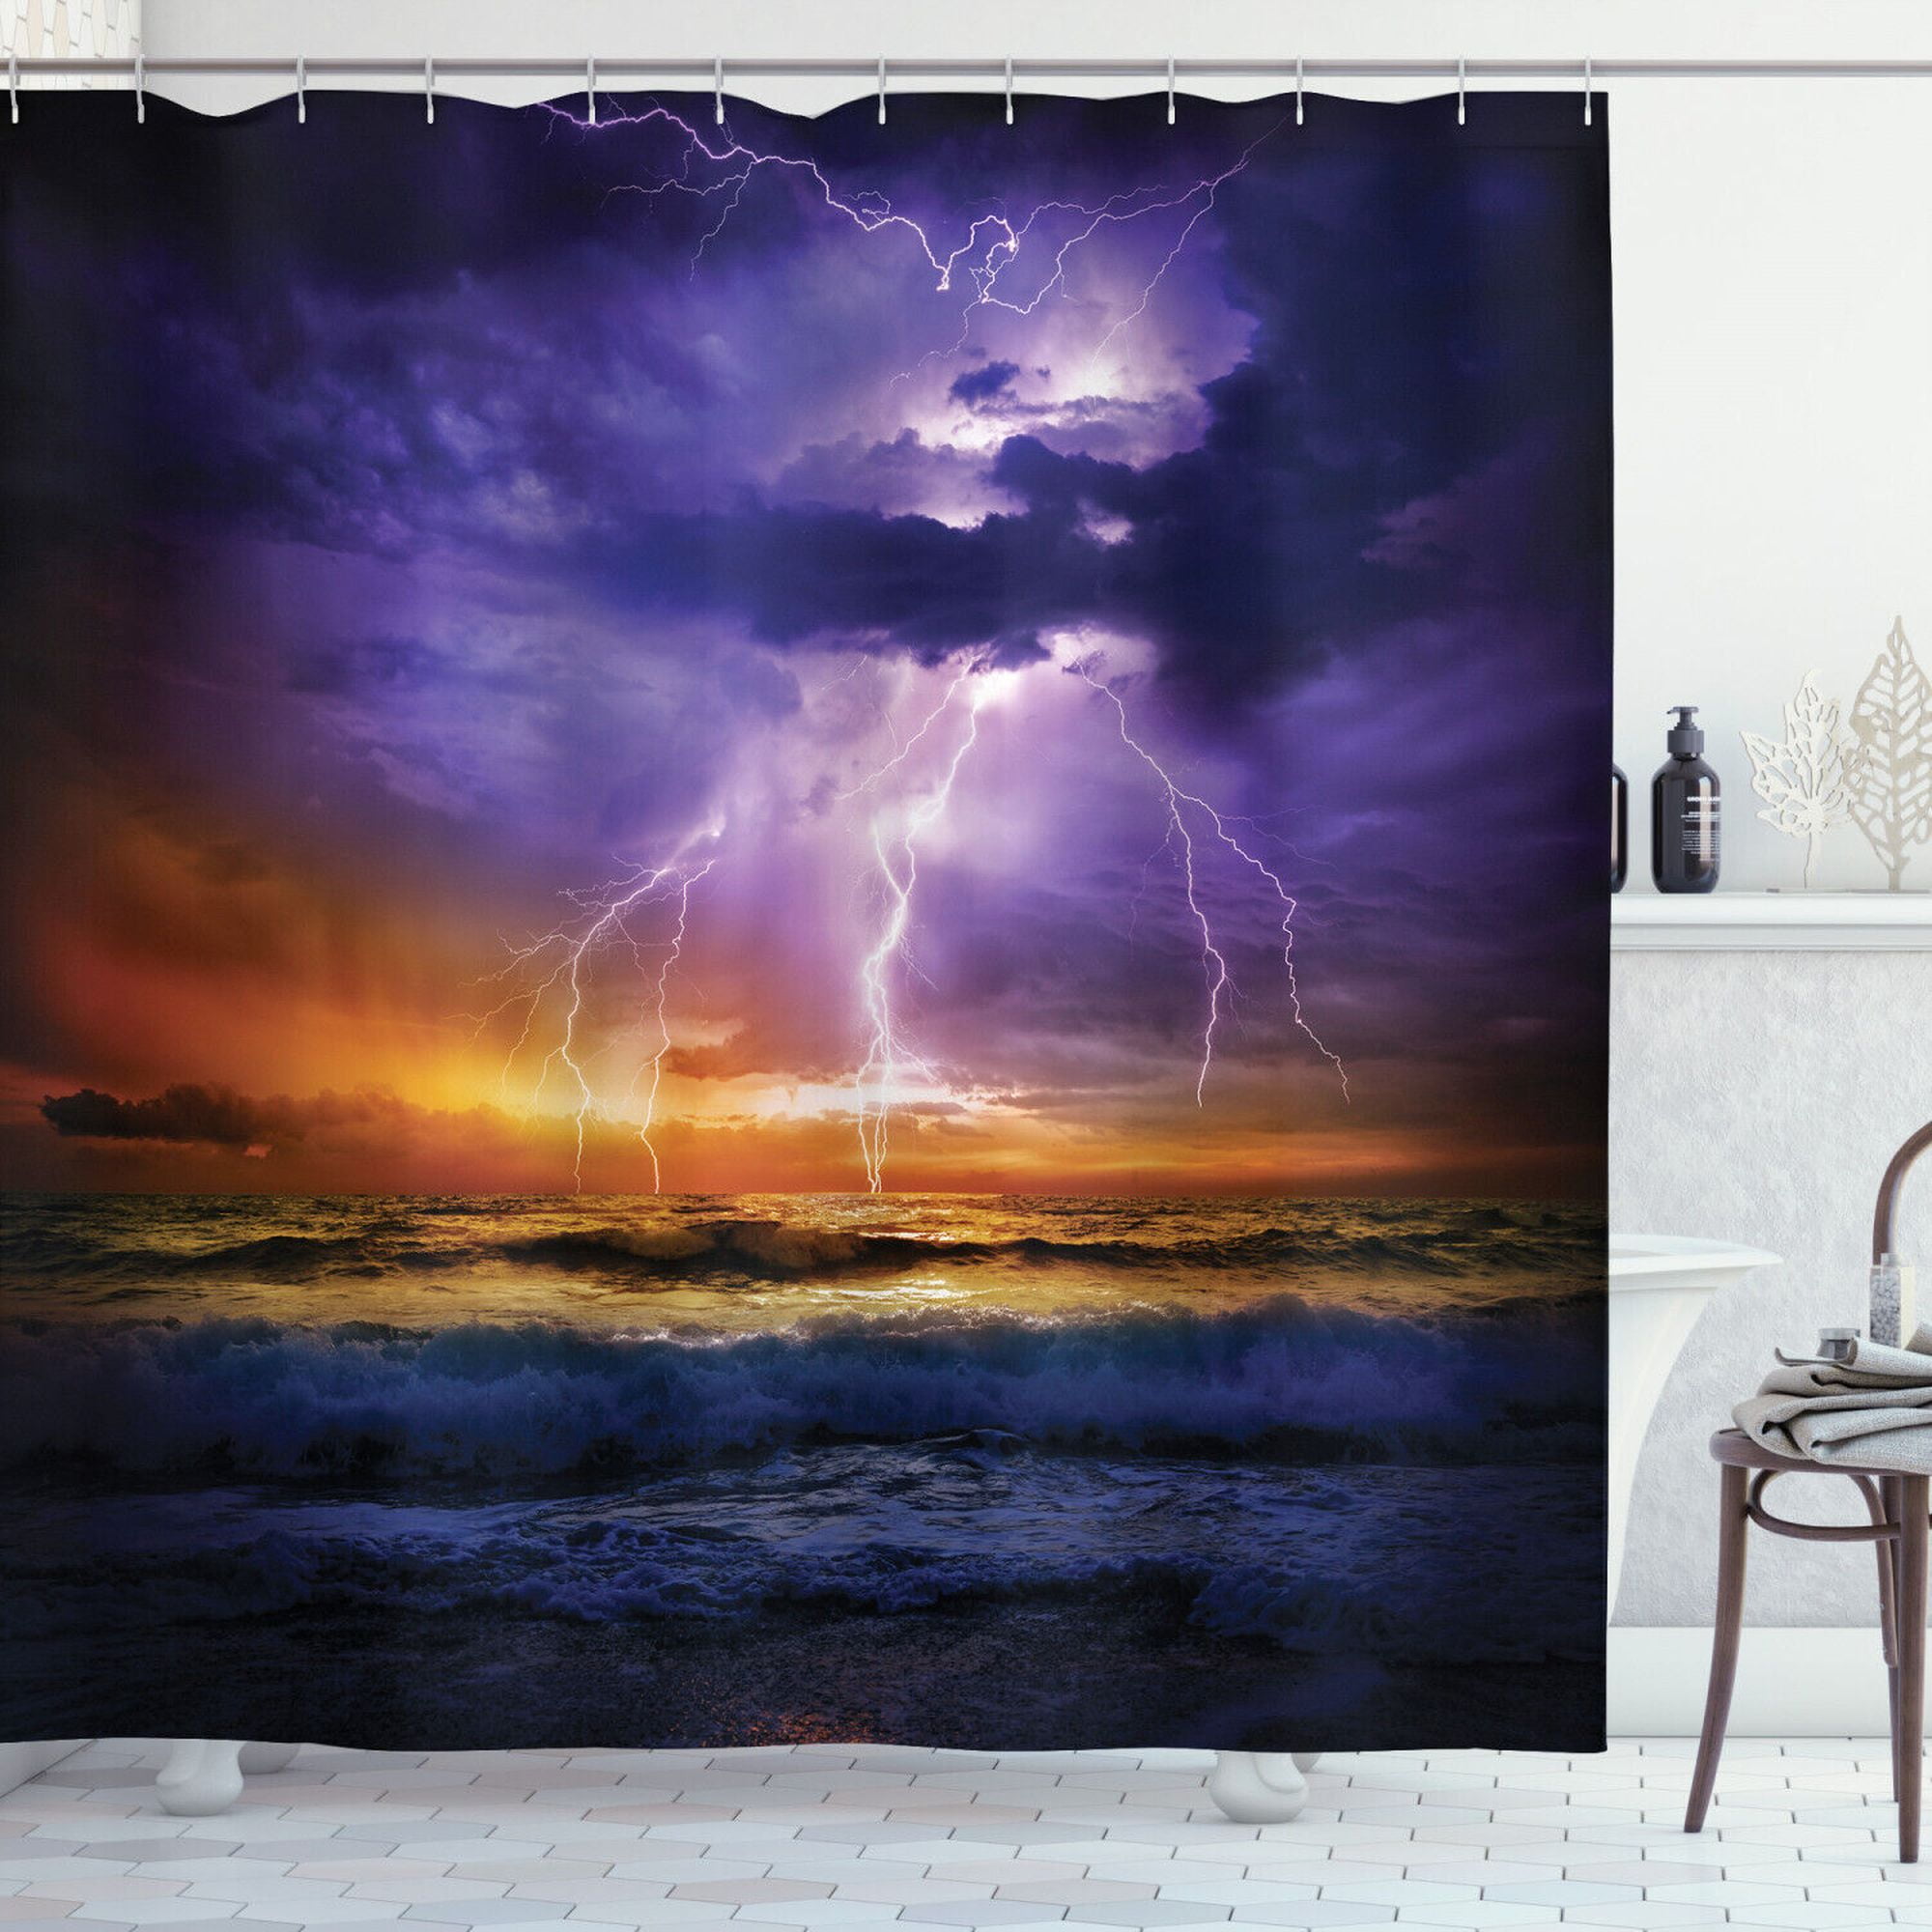 Electric Ocean: Captivating Lightning and Waves Shower Curtain for a ...